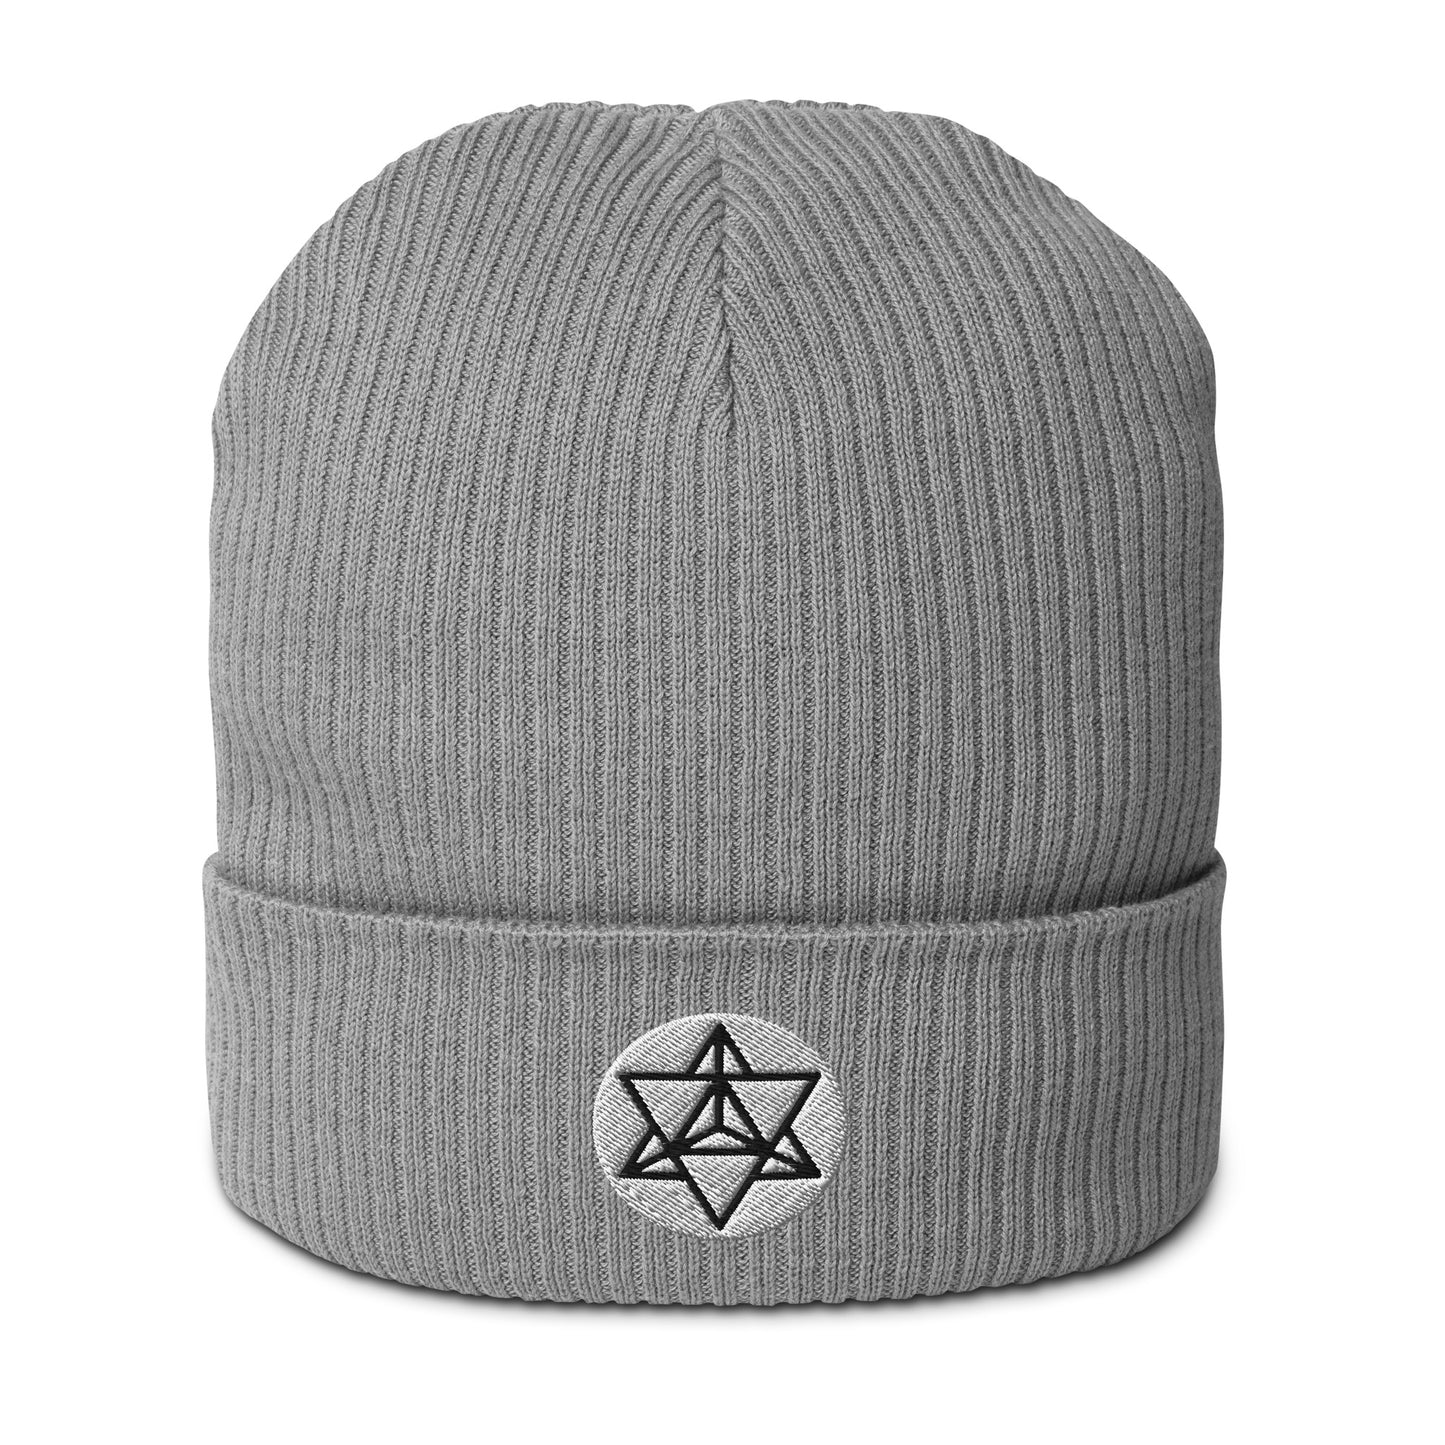 The Merkaba symbol beanie hat in Cloudy Gray, crafted from organic cotton and adorned with intricate embroidery. Symbolizing the journey of ascension and divine protection, the Merkaba represents profound spiritual transformation and unity of mind, body, and spirit.